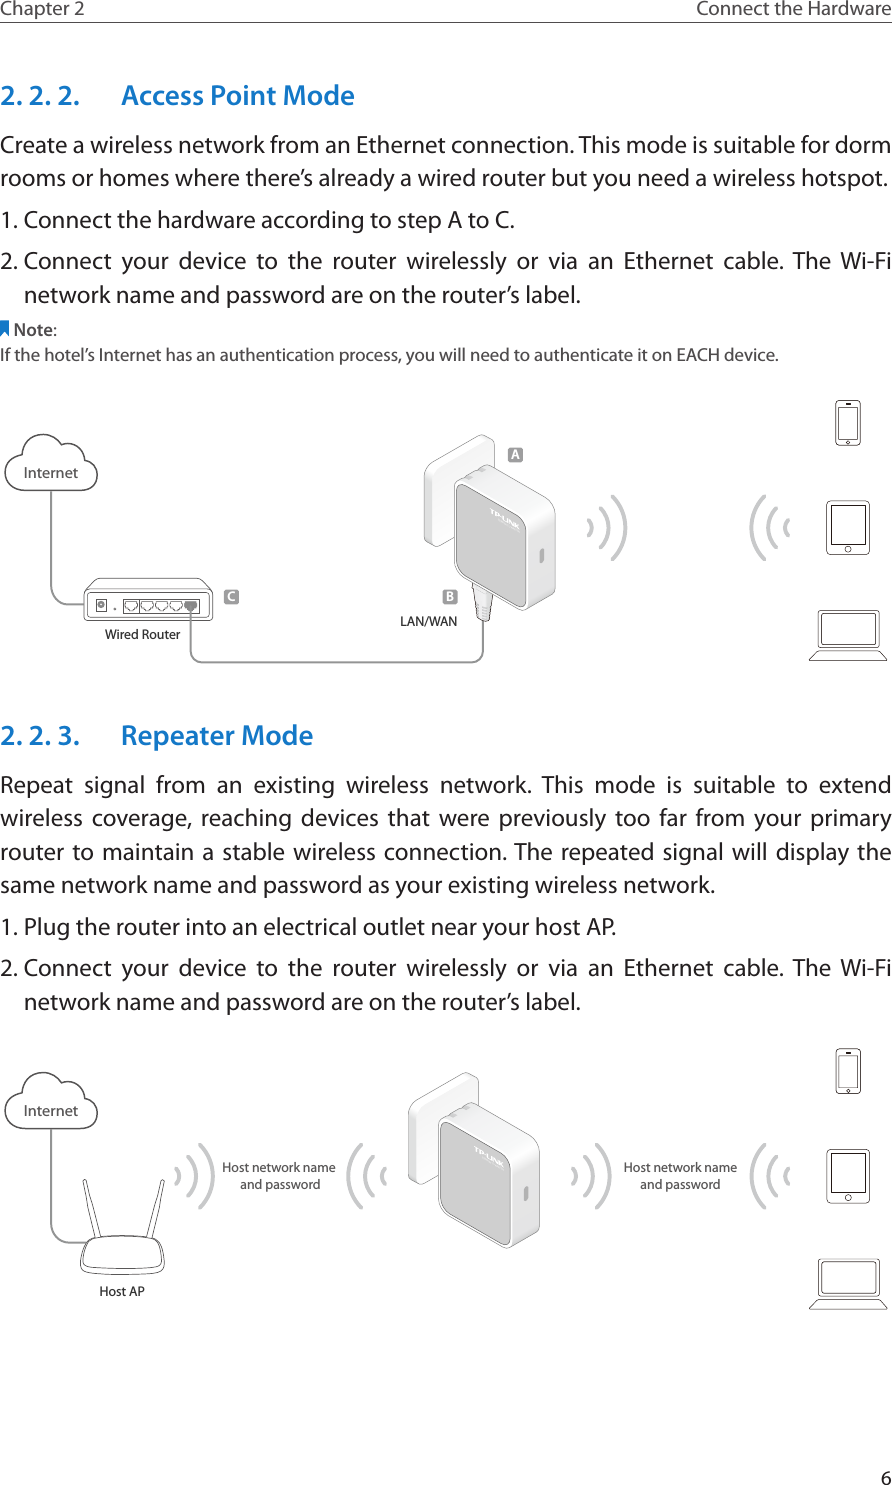 6Chapter 2 Connect the Hardware2. 2. 2.  Access Point ModeCreate a wireless network from an Ethernet connection. This mode is suitable for dorm rooms or homes where there’s already a wired router but you need a wireless hotspot.1. Connect the hardware according to step A to C.2. Connect your device to the router wirelessly or via an Ethernet cable. The Wi-Fi network name and password are on the router’s label.Note:If the hotel’s Internet has an authentication process, you will need to authenticate it on EACH device.InternetWired RouterCLAN/WAN300Mbps TL-WR810NBA2. 2. 3.  Repeater ModeRepeat signal from an existing wireless network. This mode is suitable to extend wireless coverage, reaching devices that were previously too far from your primary router to maintain a stable wireless connection. The repeated signal will display the same network name and password as your existing wireless network.1. Plug the router into an electrical outlet near your host AP.2. Connect your device to the router wirelessly or via an Ethernet cable. The Wi-Fi network name and password are on the router’s label.Host APInternet300Mbps TL-WR810NHost network name and passwordHost network nameand password